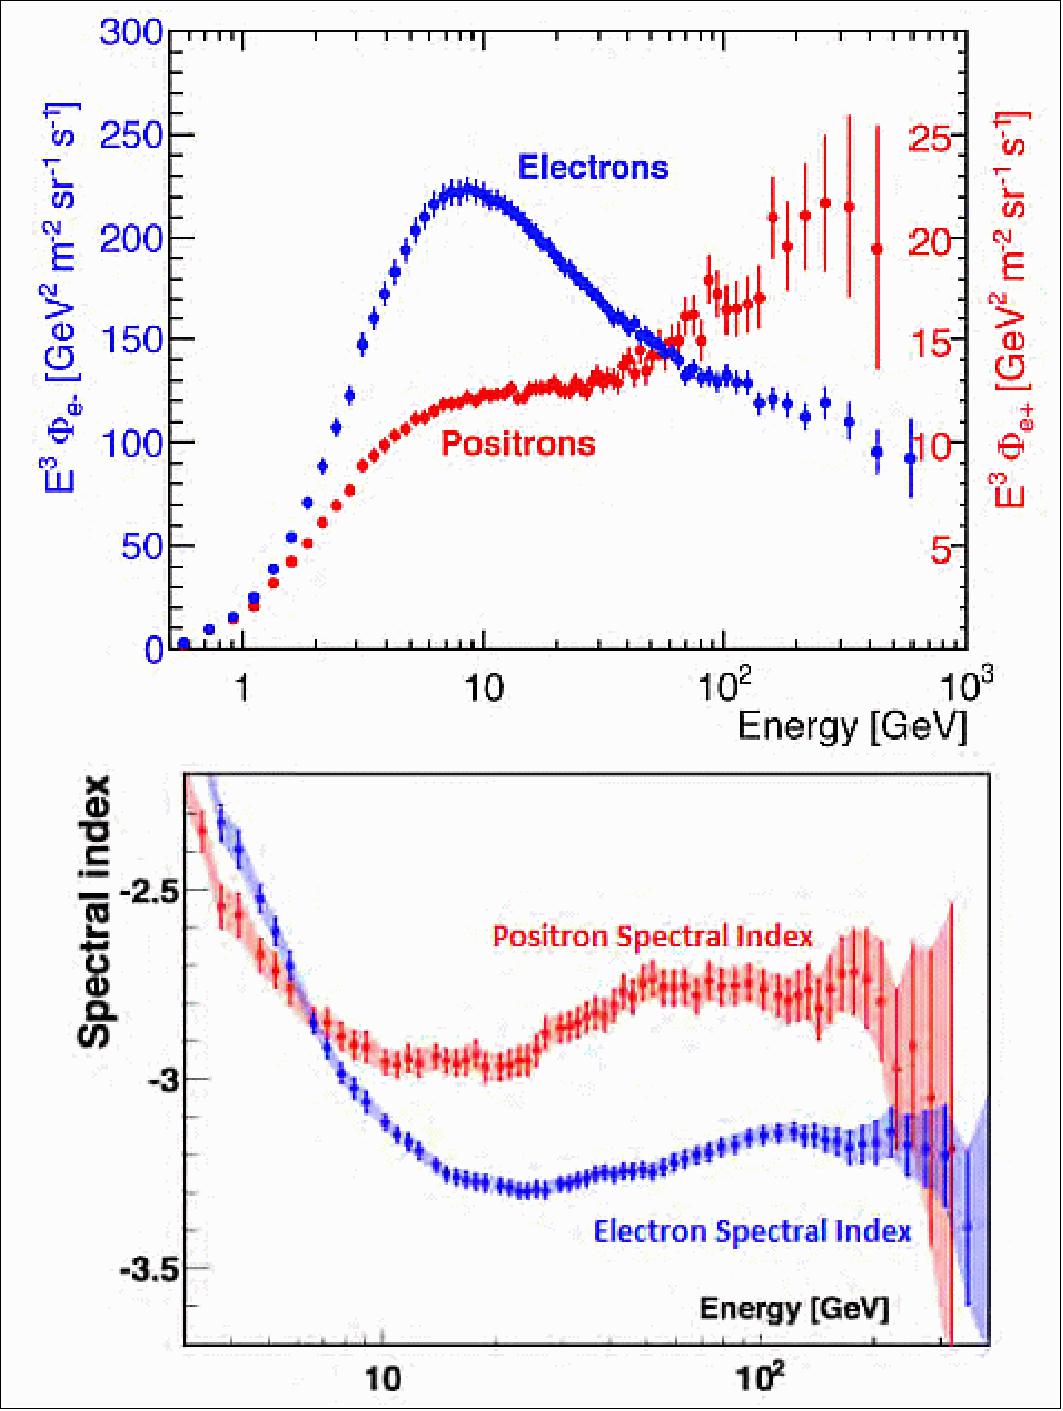 Figure 22: The upper plot highlights the difference between the electron flux (blue dots, left scale) and the positron flux (red dots, right scale). The lower plot shows the spectral indices of the electron flux and of the positron flux as functions of energy (image credit: AMS collaboration).